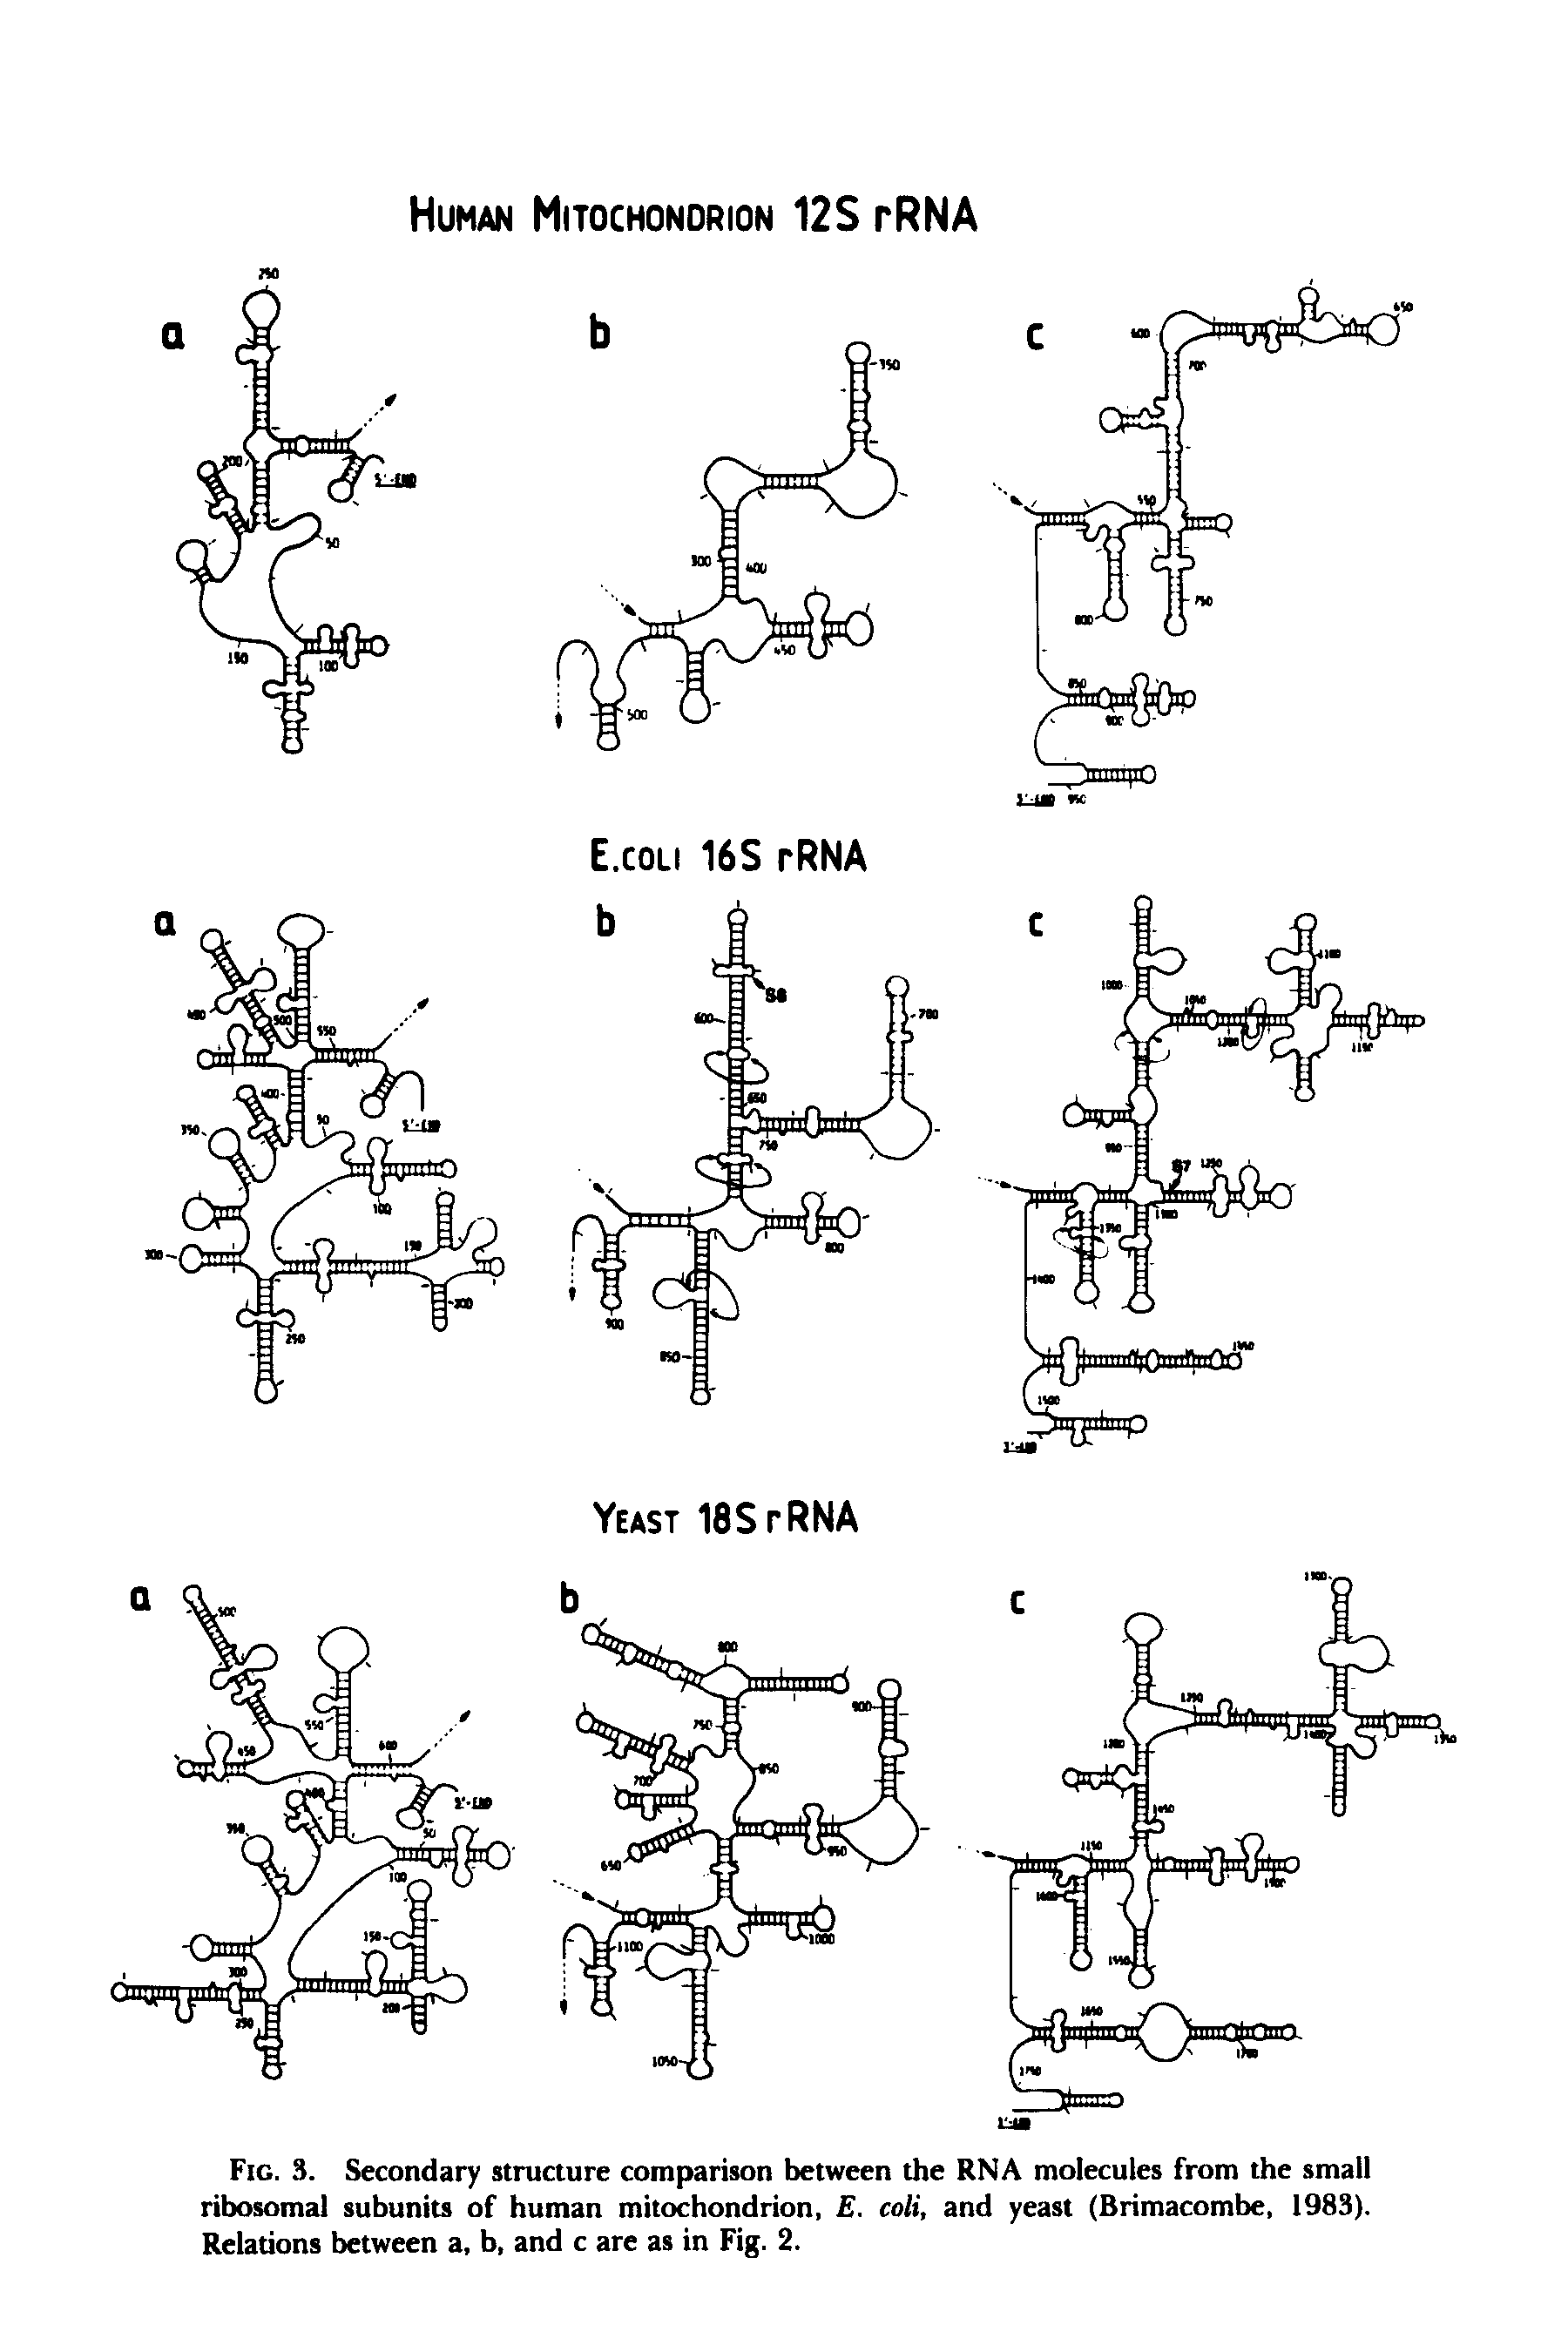 Fig. 3. Secondary structure comparison between the RNA molecules from the small ribosomal subunits of human mitochondrion, E. coli, and yeast (Brimacombe, 1983). Relations between a, b, and c are as in Fig. 2.